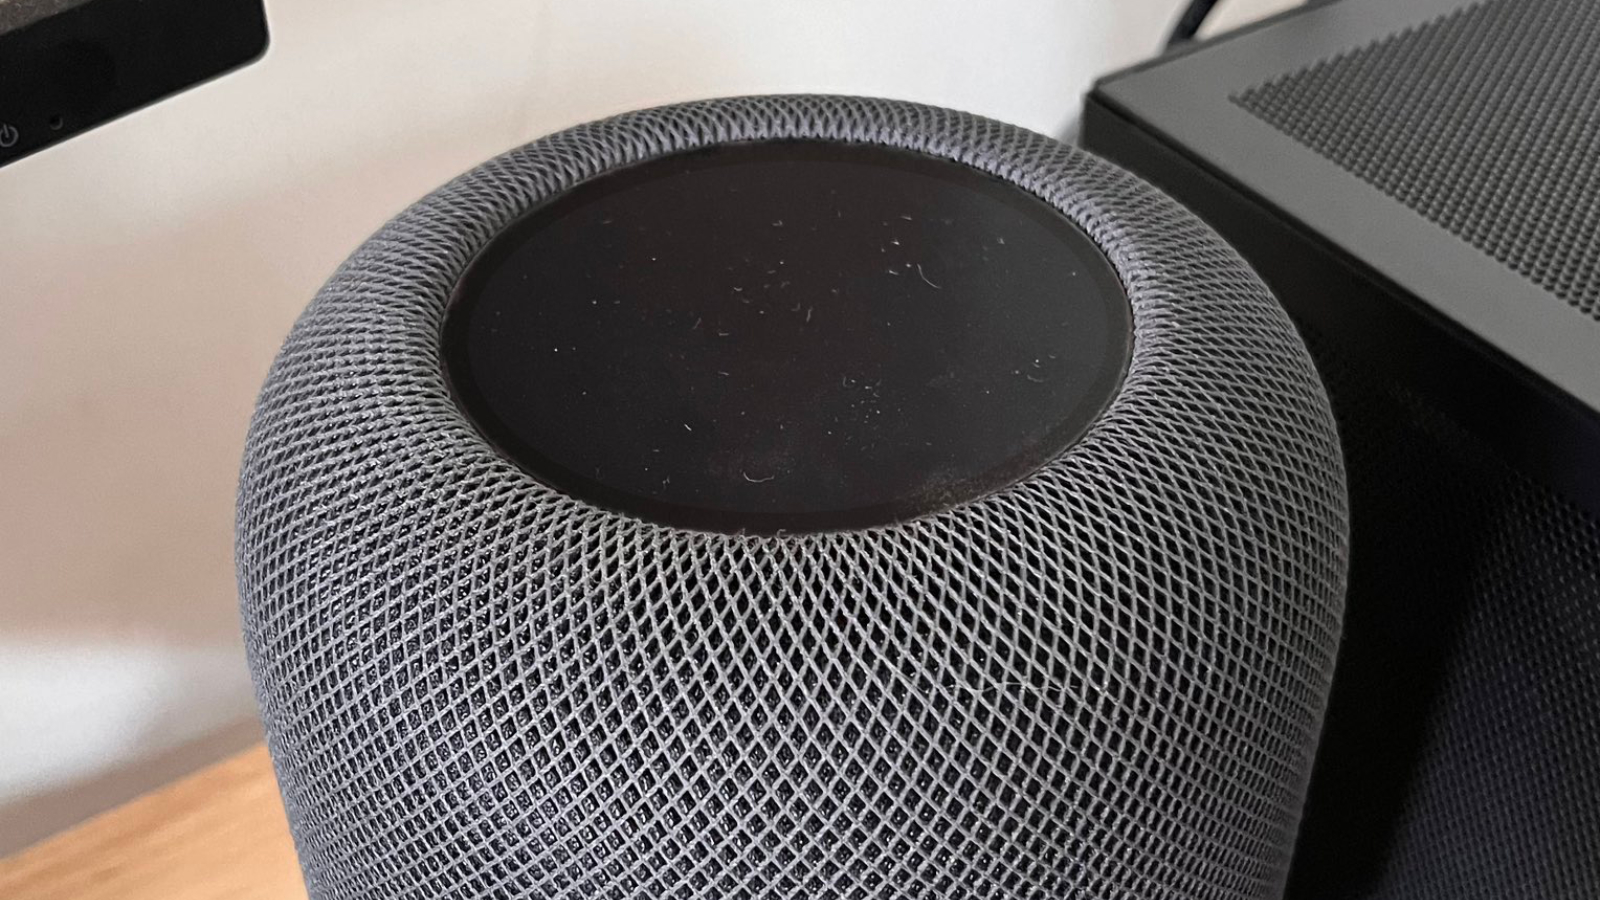 Alleged HomePod Display Component Again Shown Off in Photo